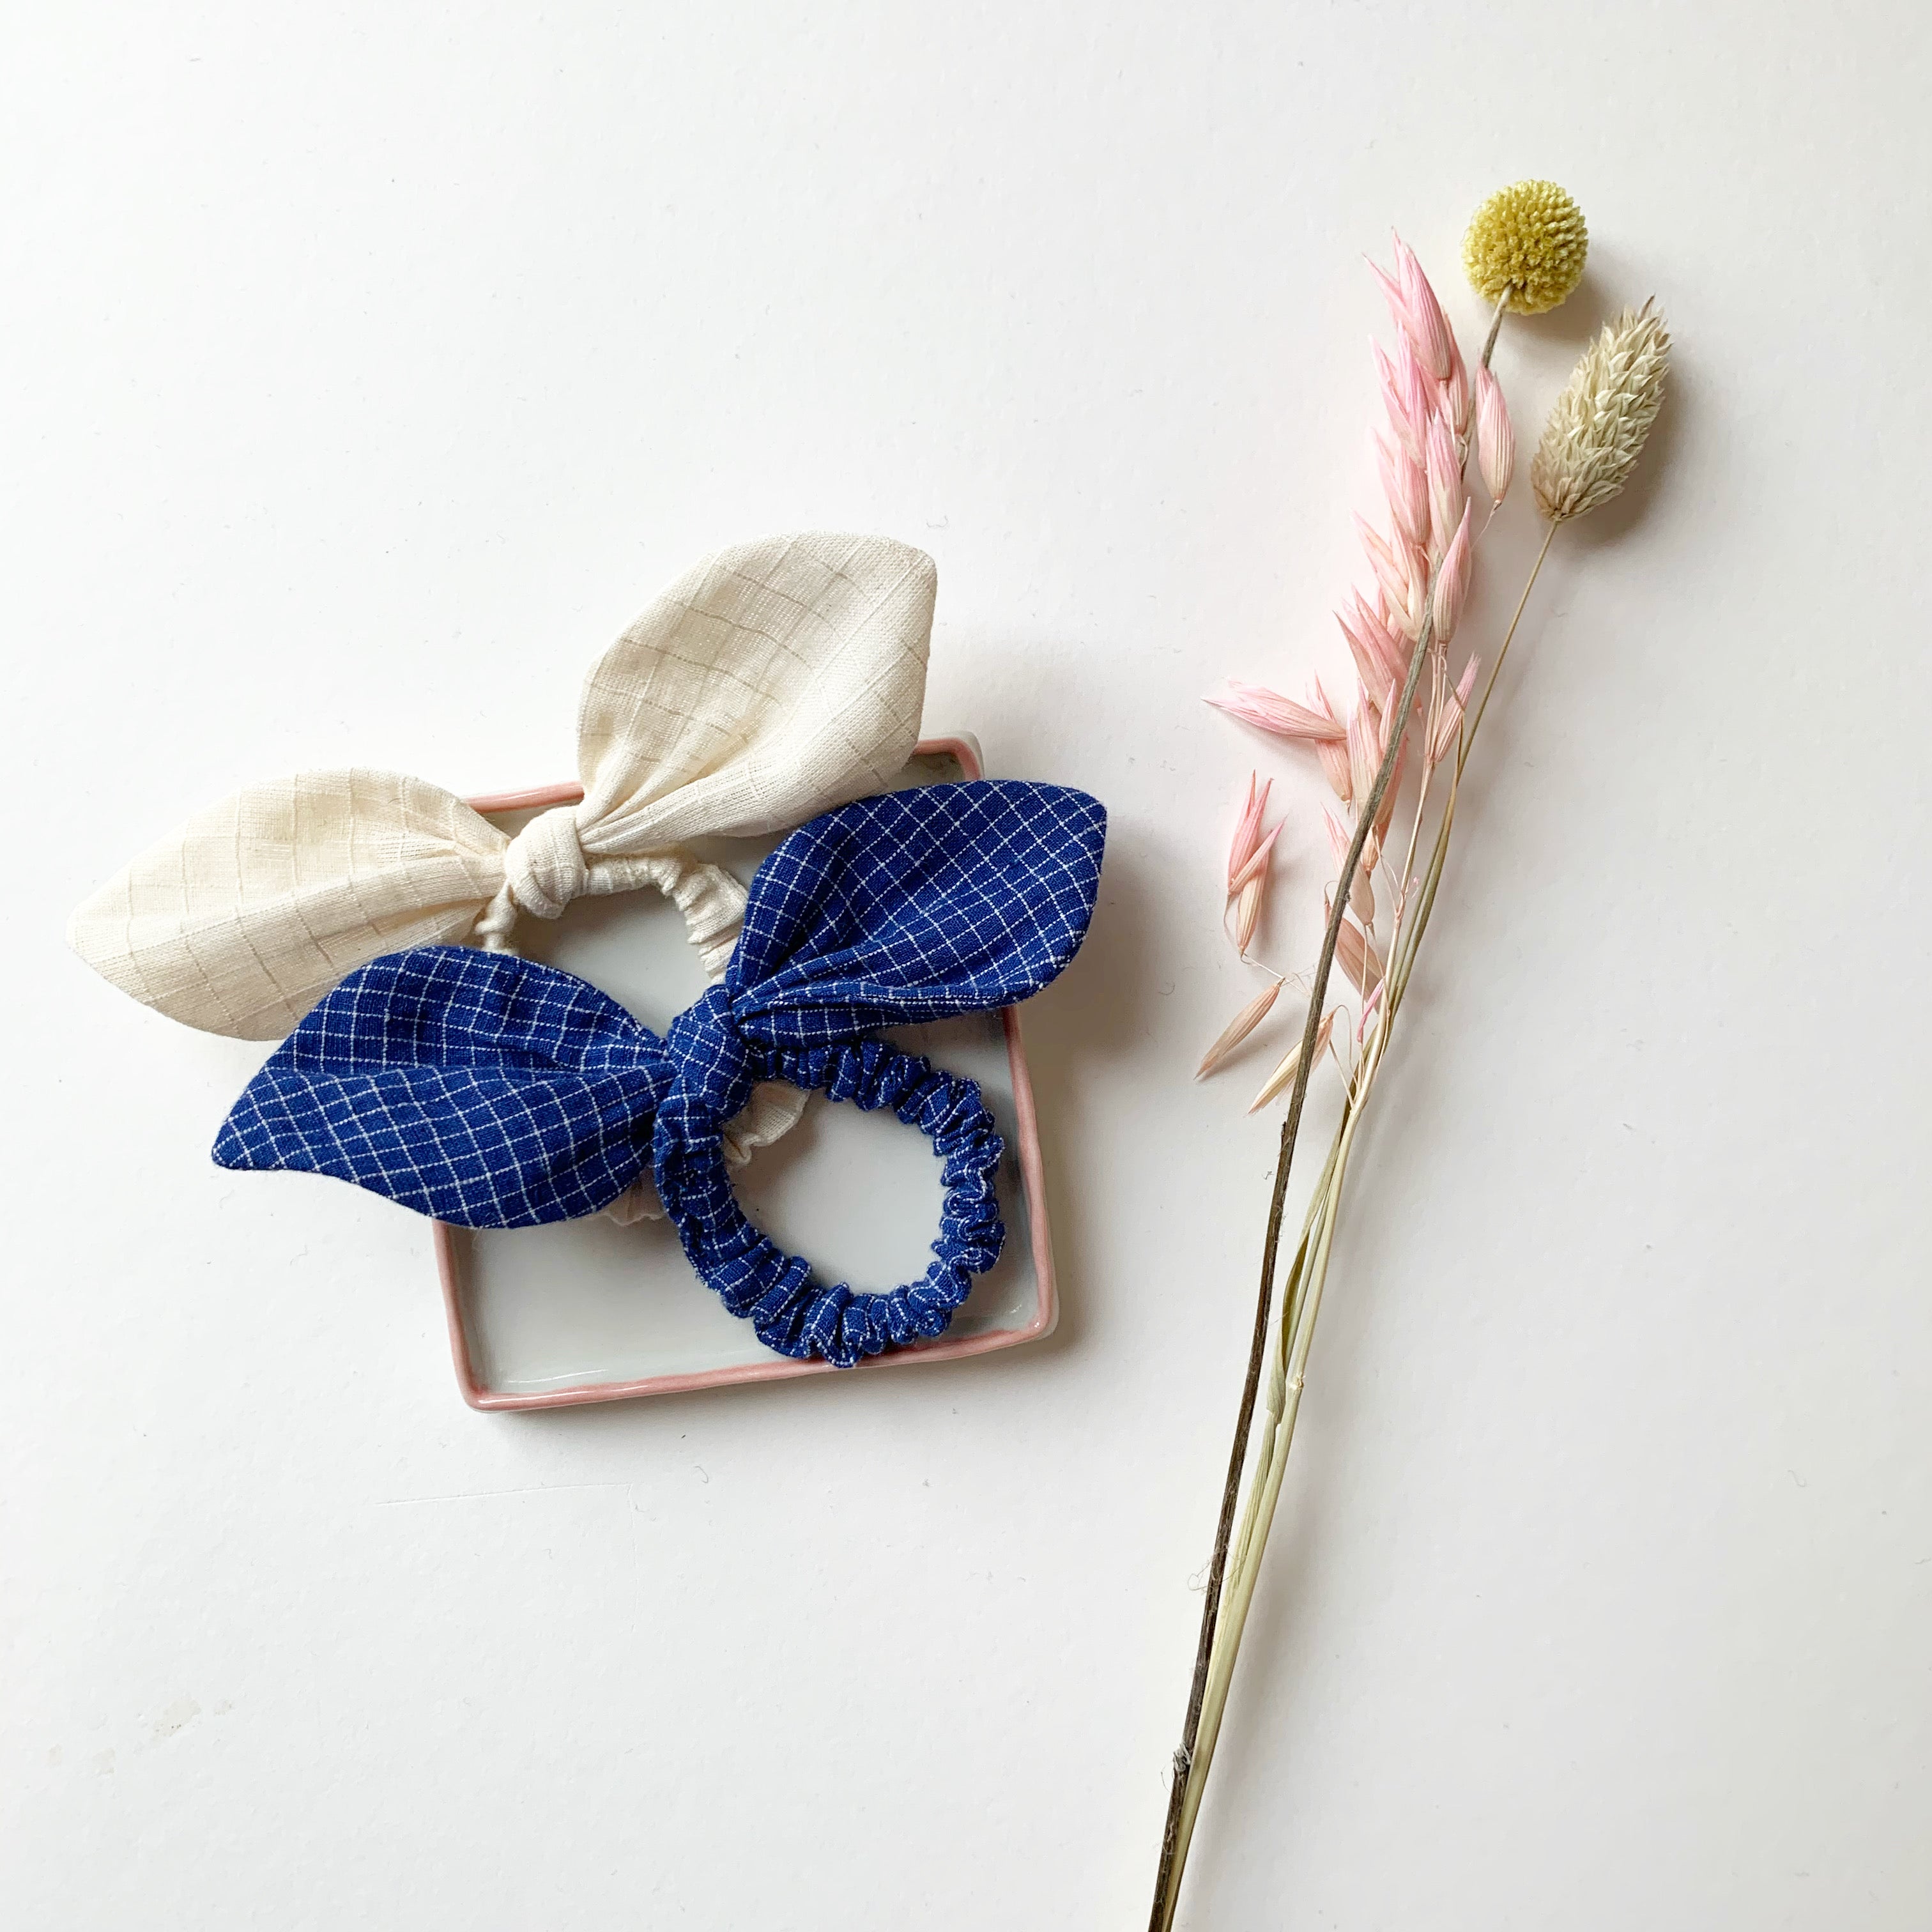 Bow Scrunchie - Electric Blue Check